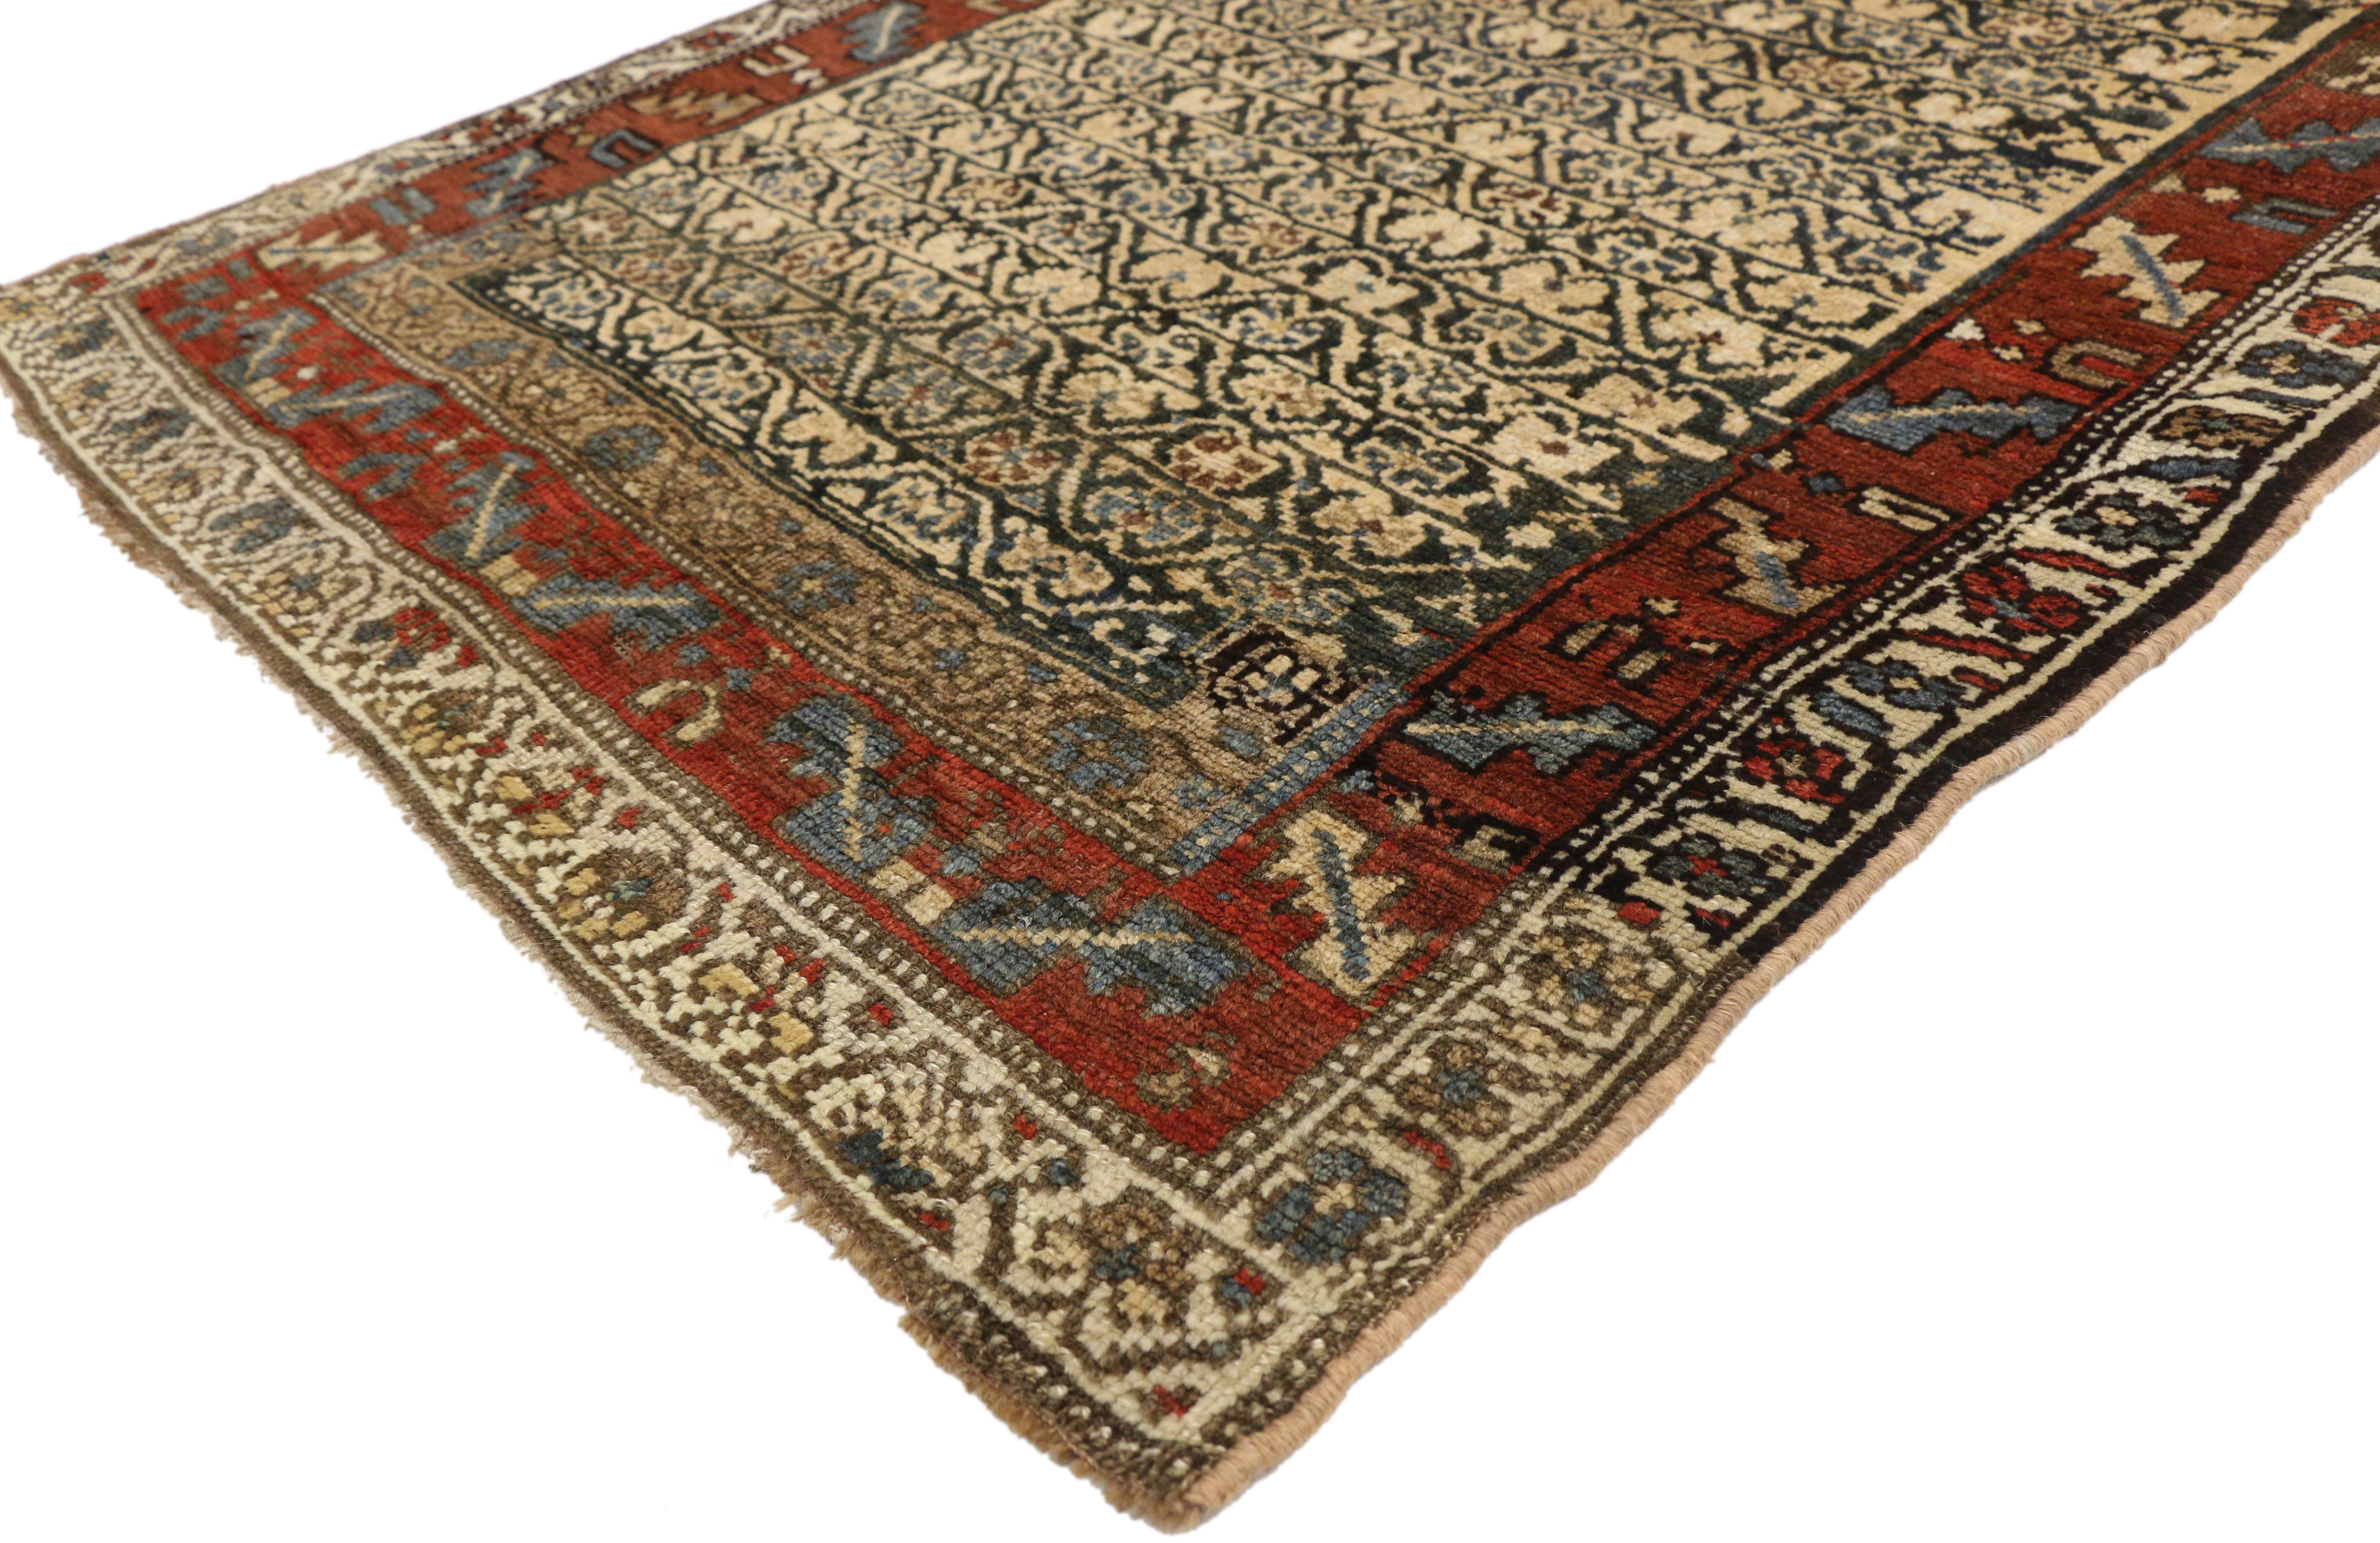 77278, antique Persian Kurdish hallway runner with artisan Arts & Crafts style. This hand knotted wool antique Persian Kurdish hallway runner features horizontal rows of carnation meander stripes. It is finished with a leaf and calyx style (wine